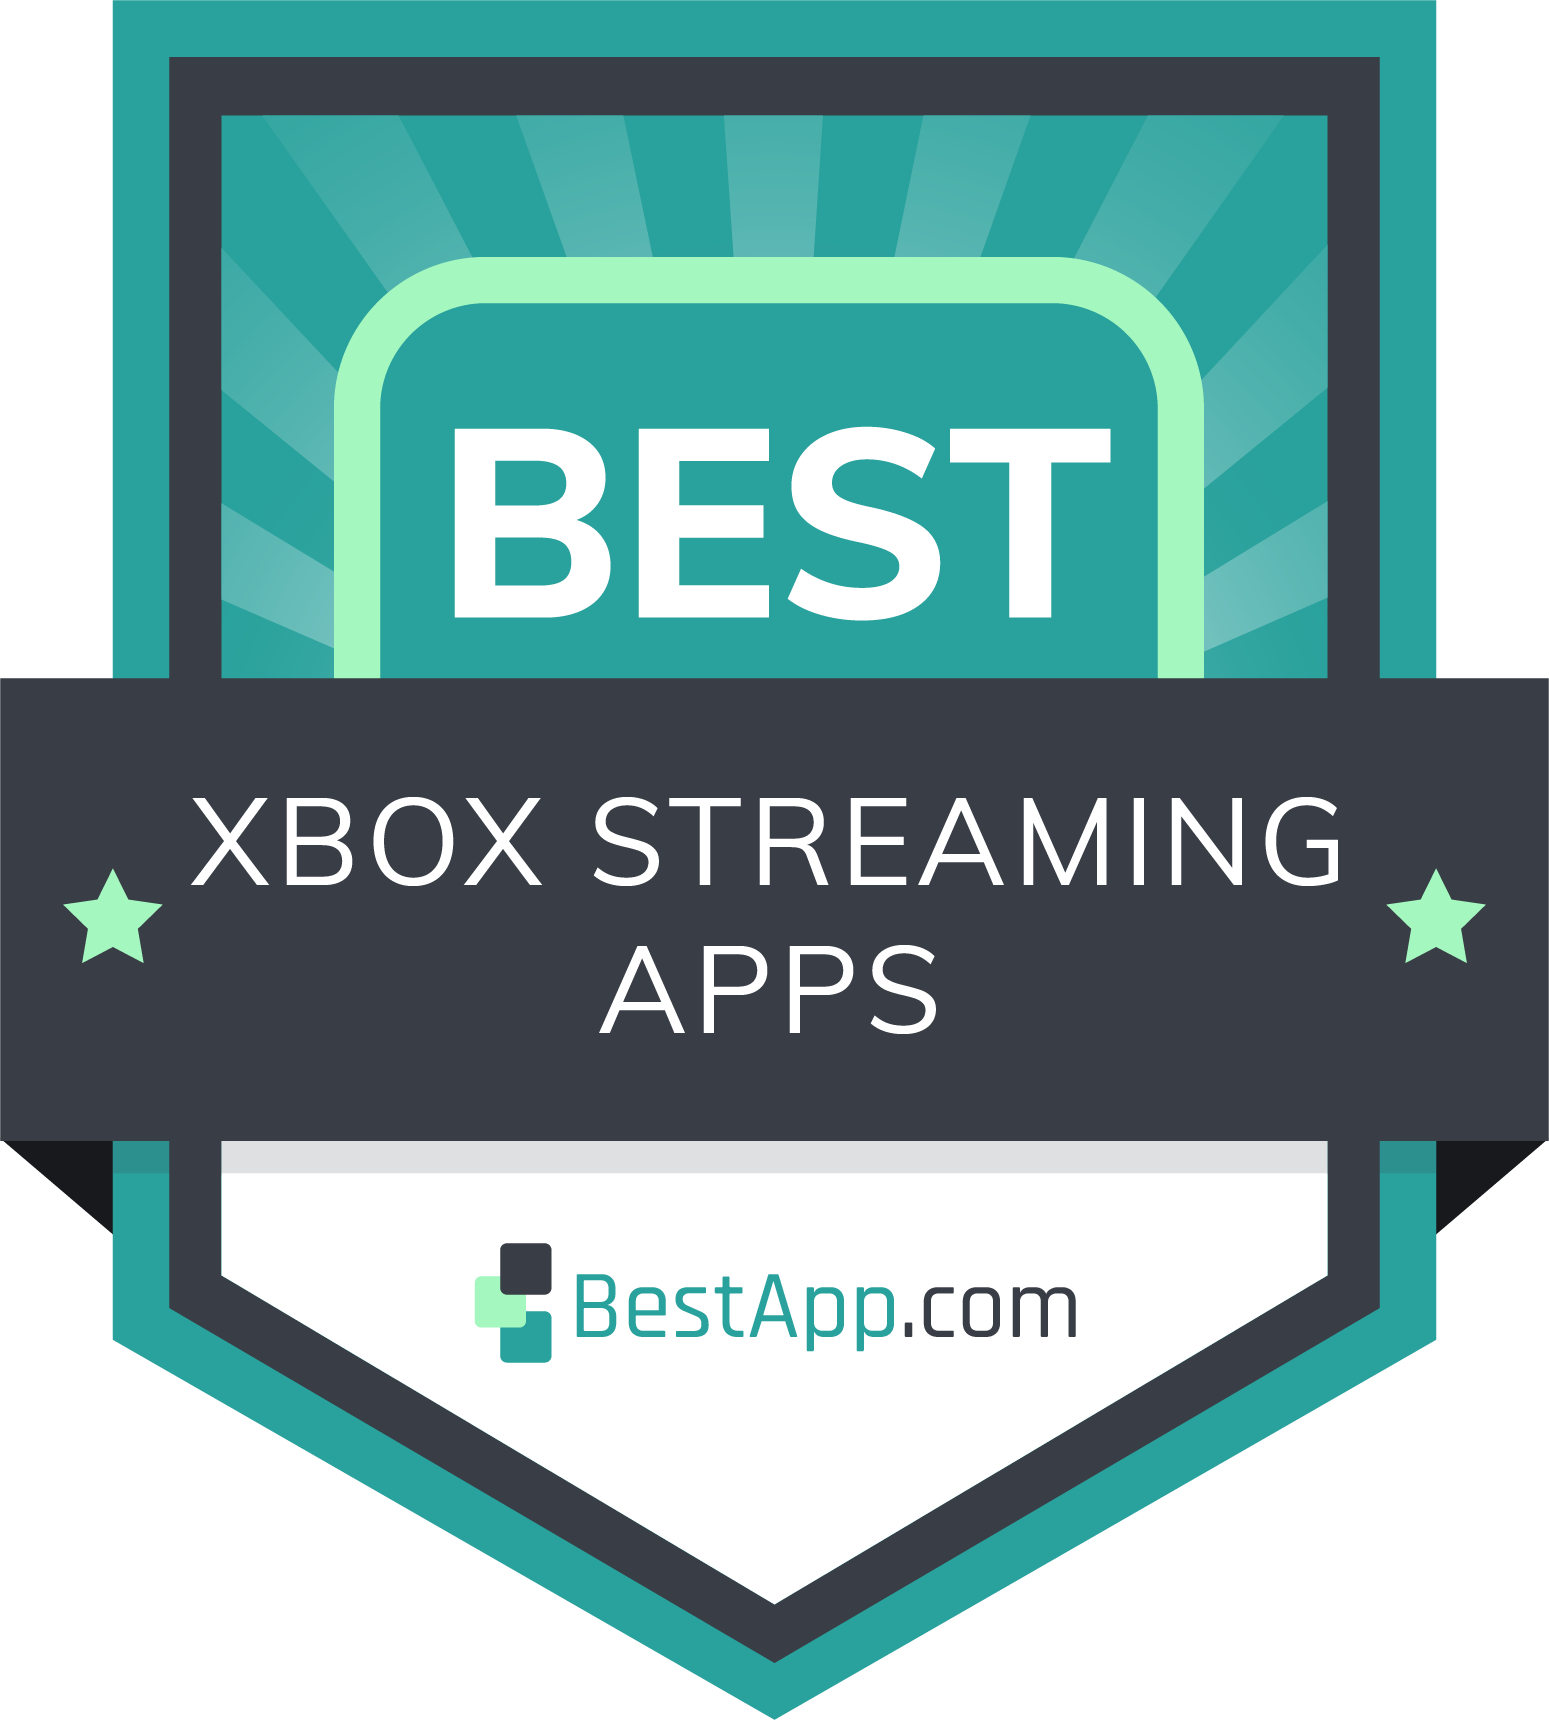 Best XBOX Streaming Apps Badge